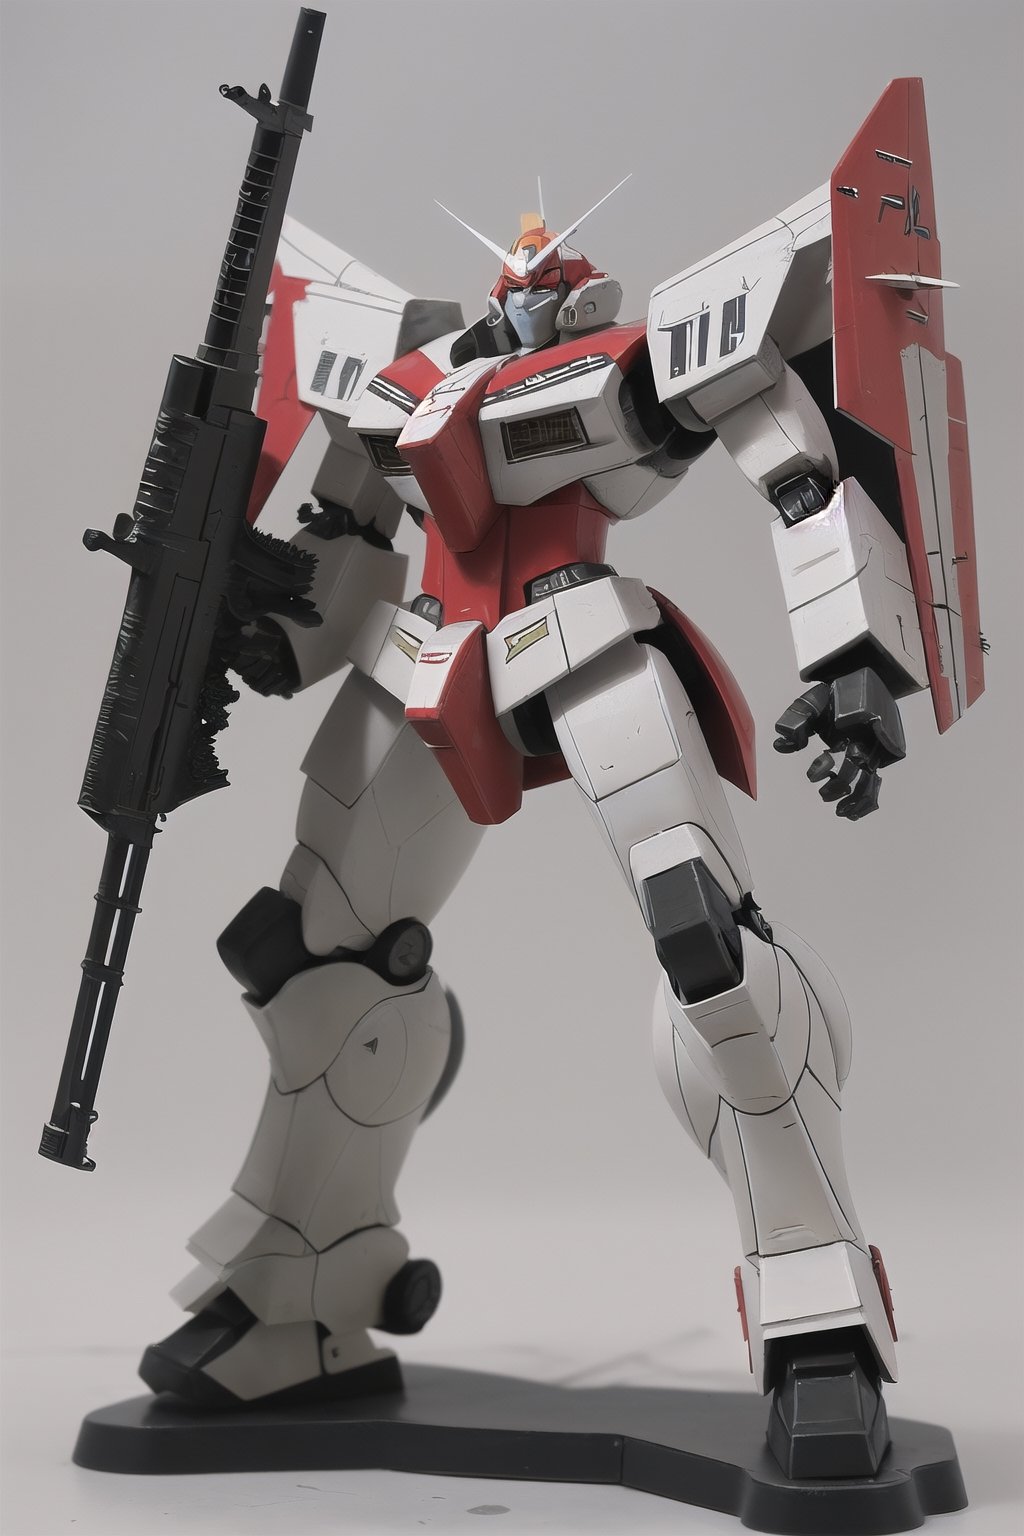 macross_mecha, full figure, F14_tomcat, super_robot, flying_pose, humanoid, combat_airplane, grey, camouflage_paint, full_face_mask, beefy, shoulder cannon, standing pose, big rifle
